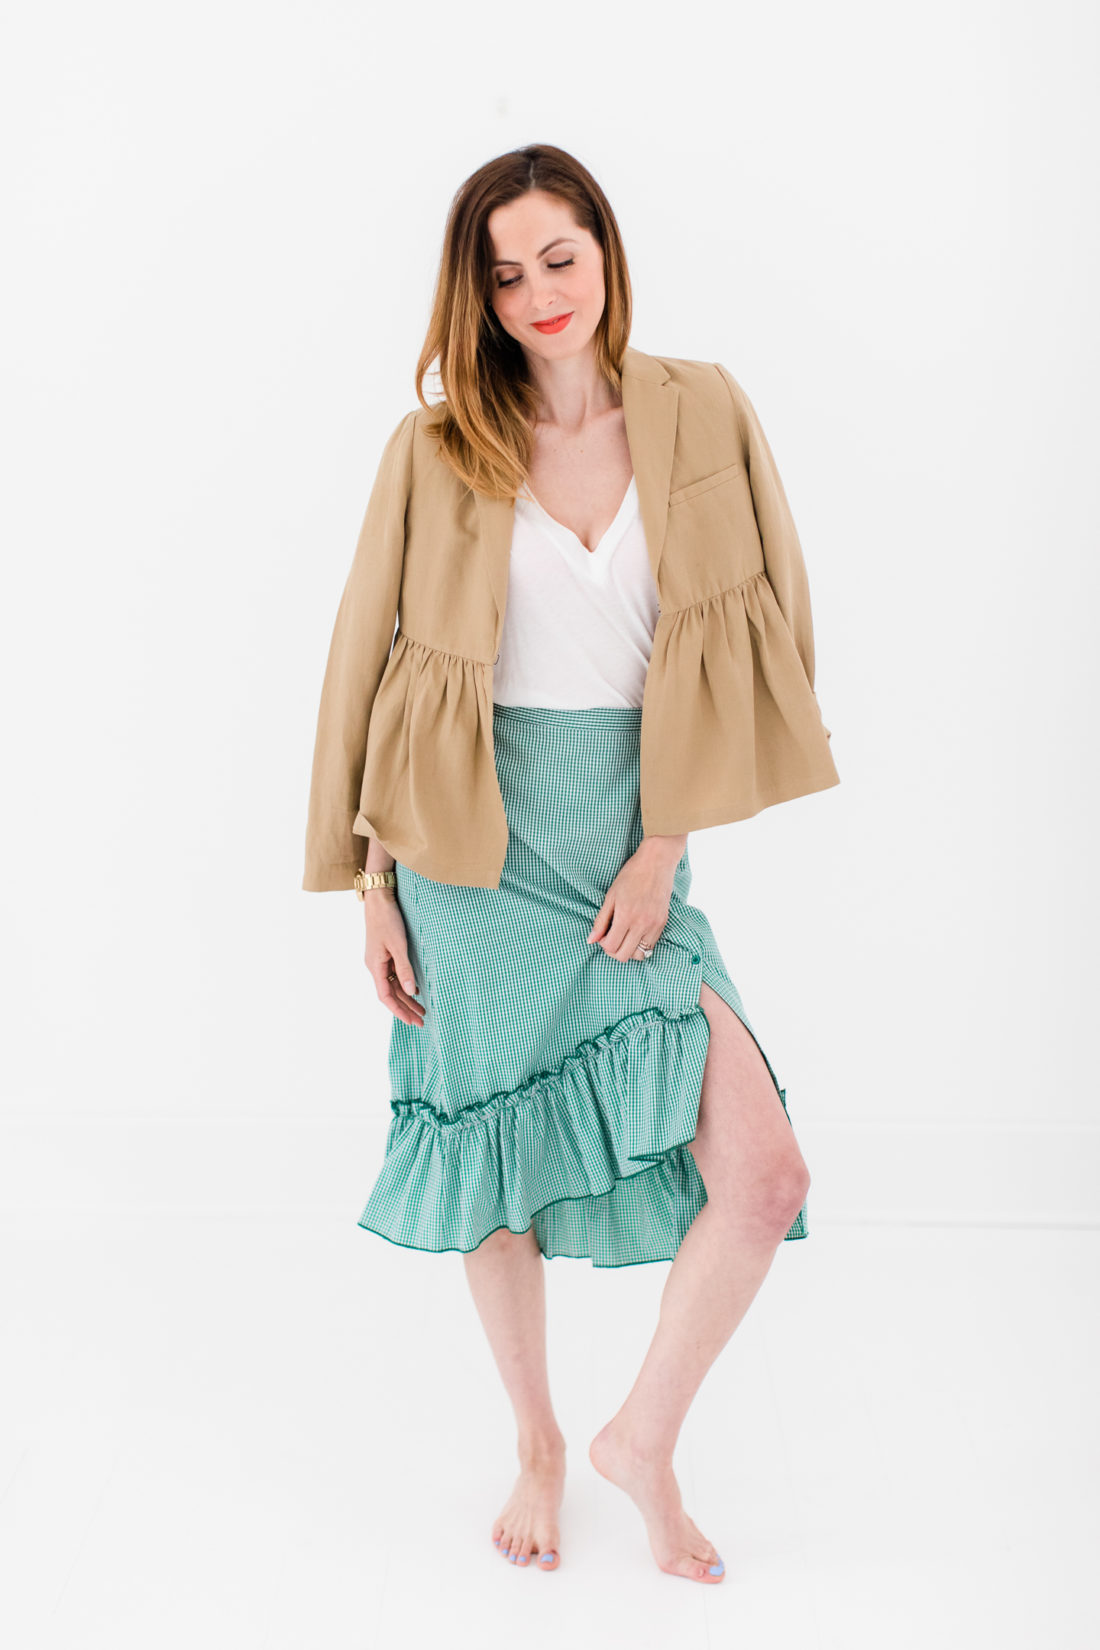 Eva Amurri Martino wears a green gingham ruffled skirt, white Tee, and tan ruffled jacket by BURU as part of a post about how to pack a suitcase